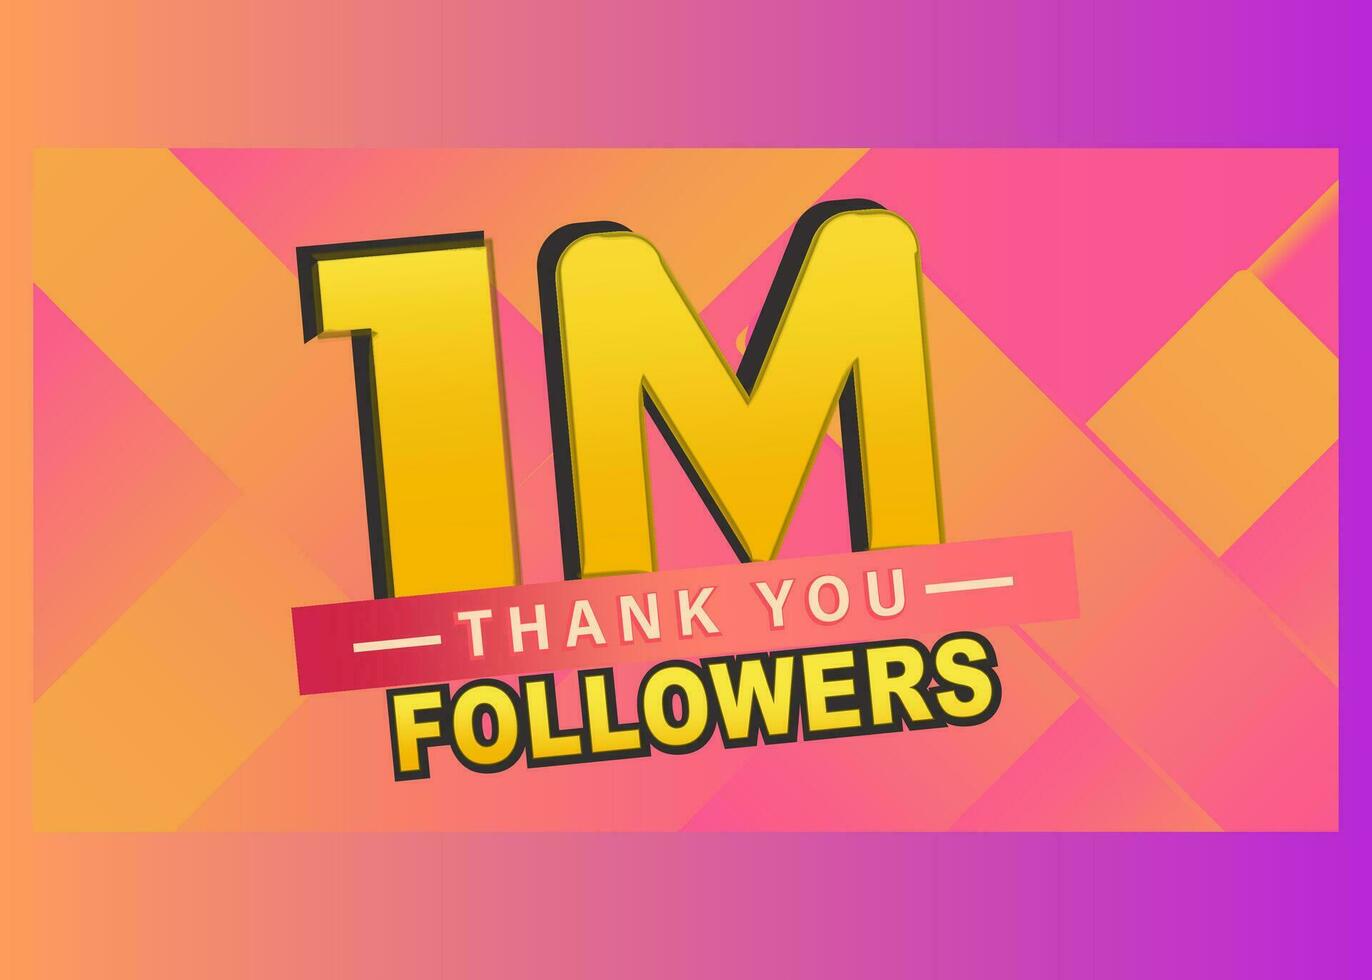 Thank you 1m followers banner, Thanks followers congratulation card, Vector illustration, gradient background, thumbnail, subscribers, post, text, follow, blog, like, vector